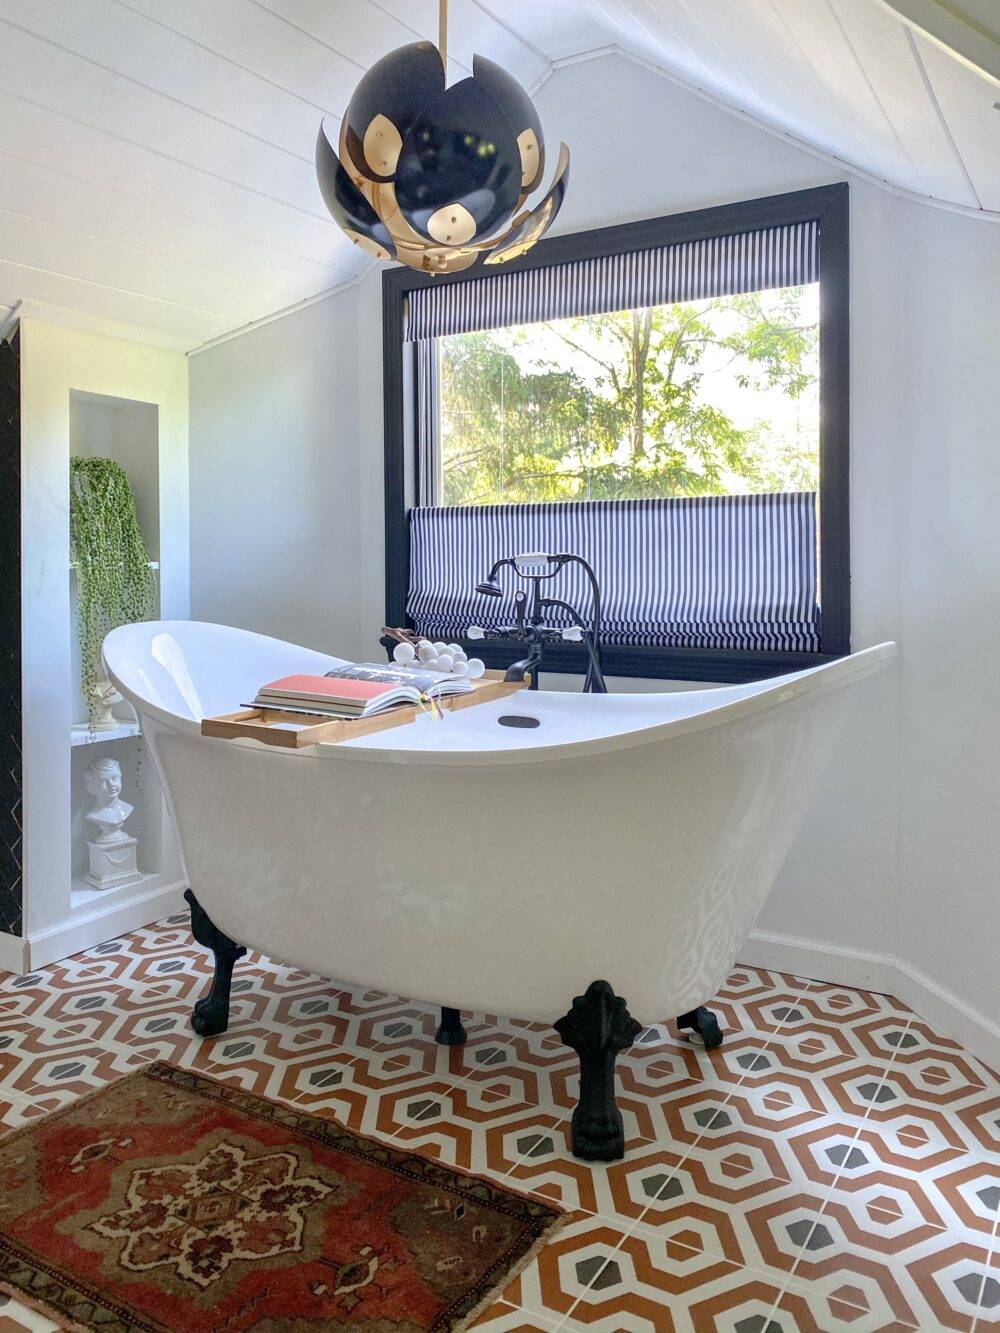 Free-standing soaking tub with geometric orange and black patterned floor tile. 